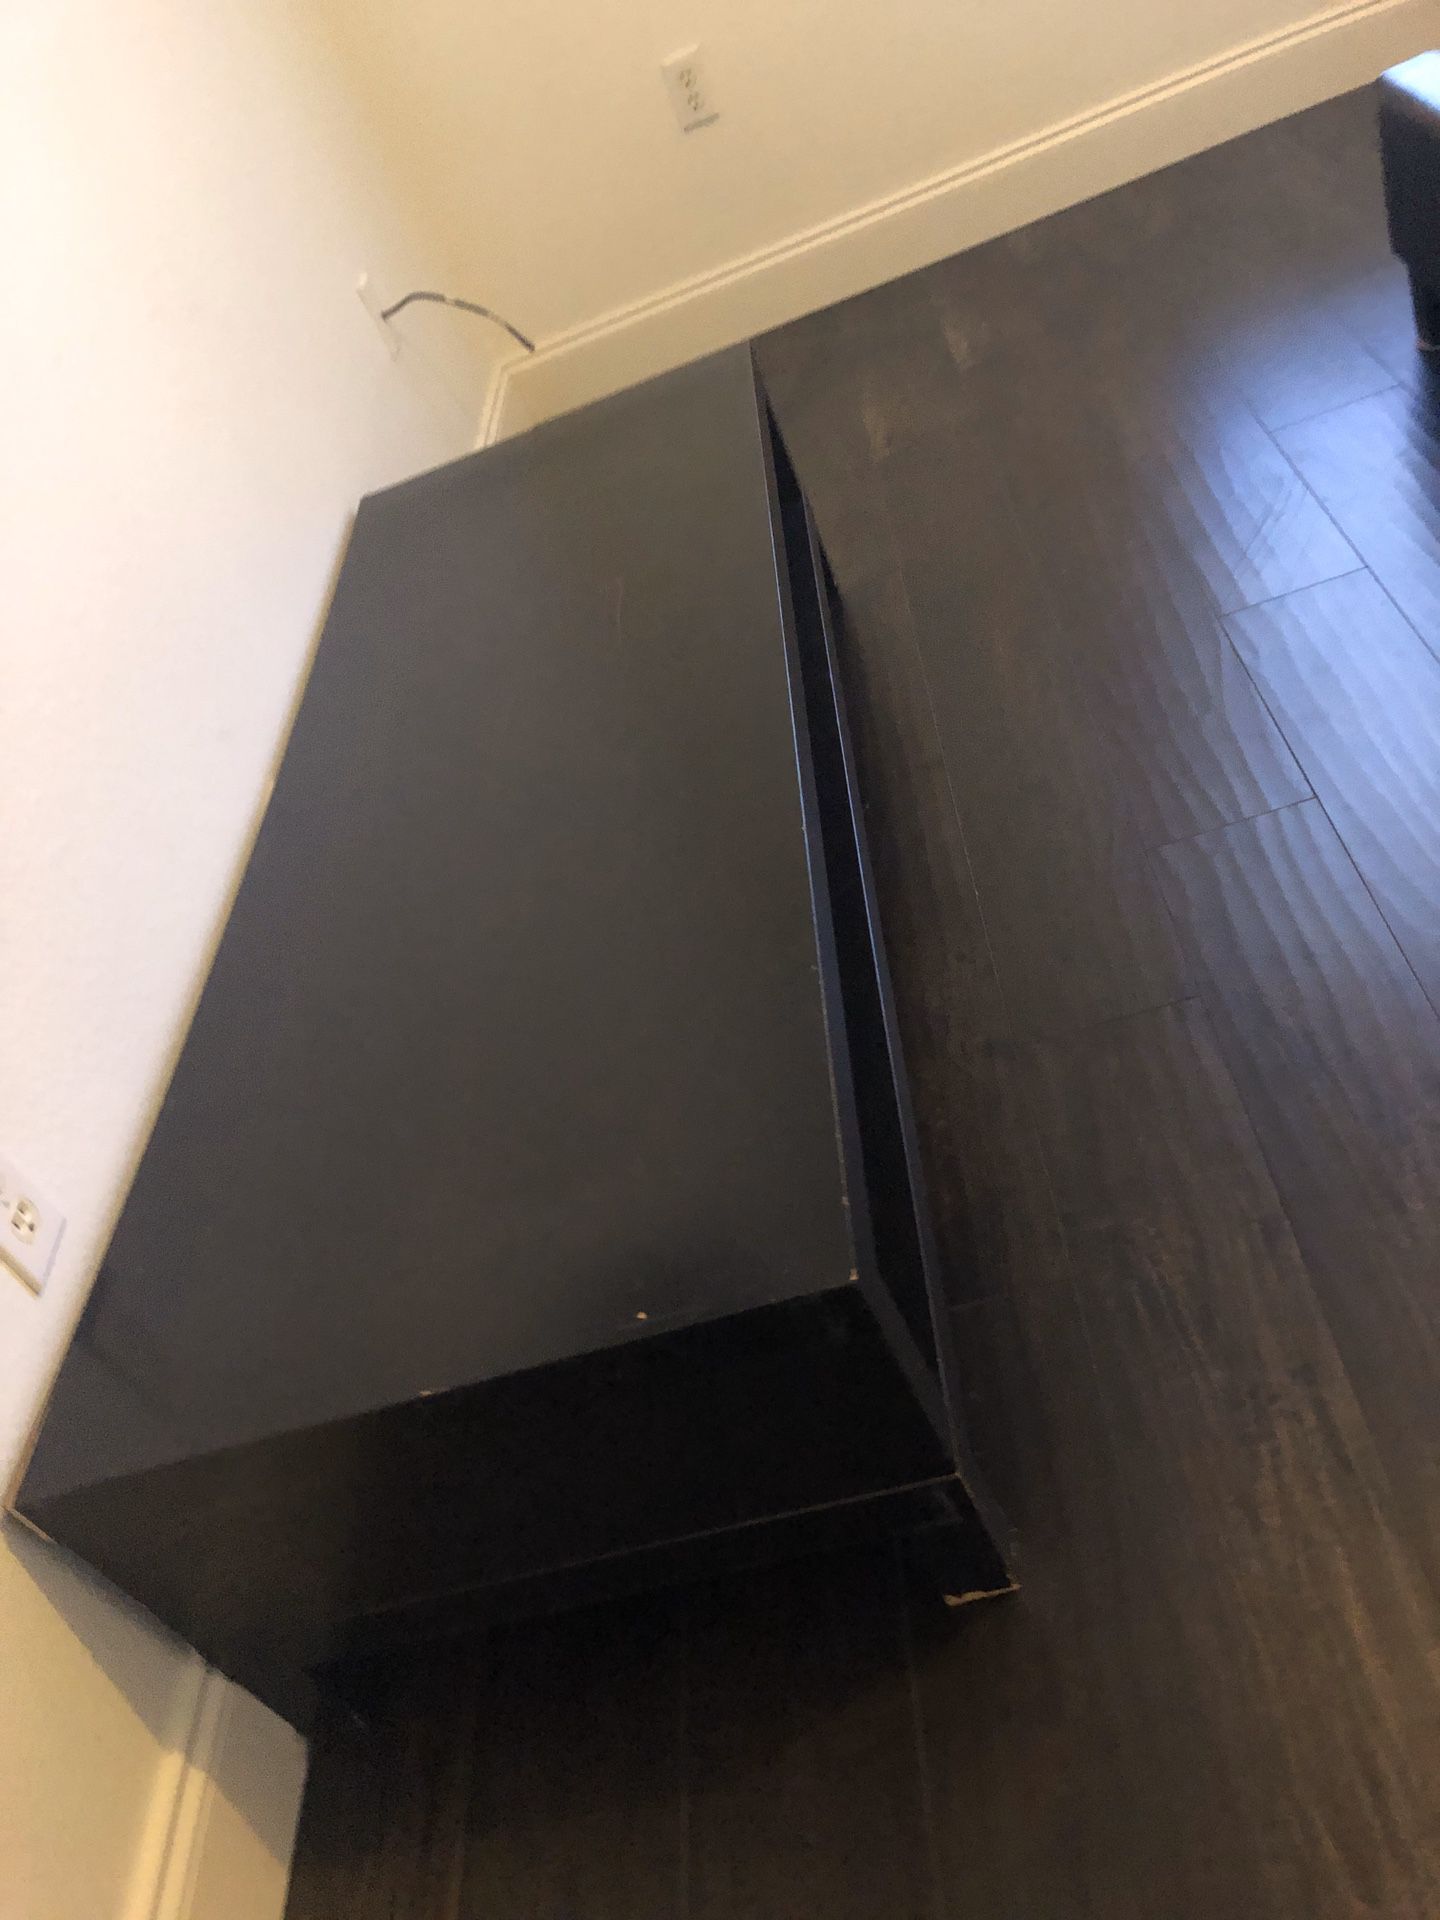 Ikea Tv stand moving this week